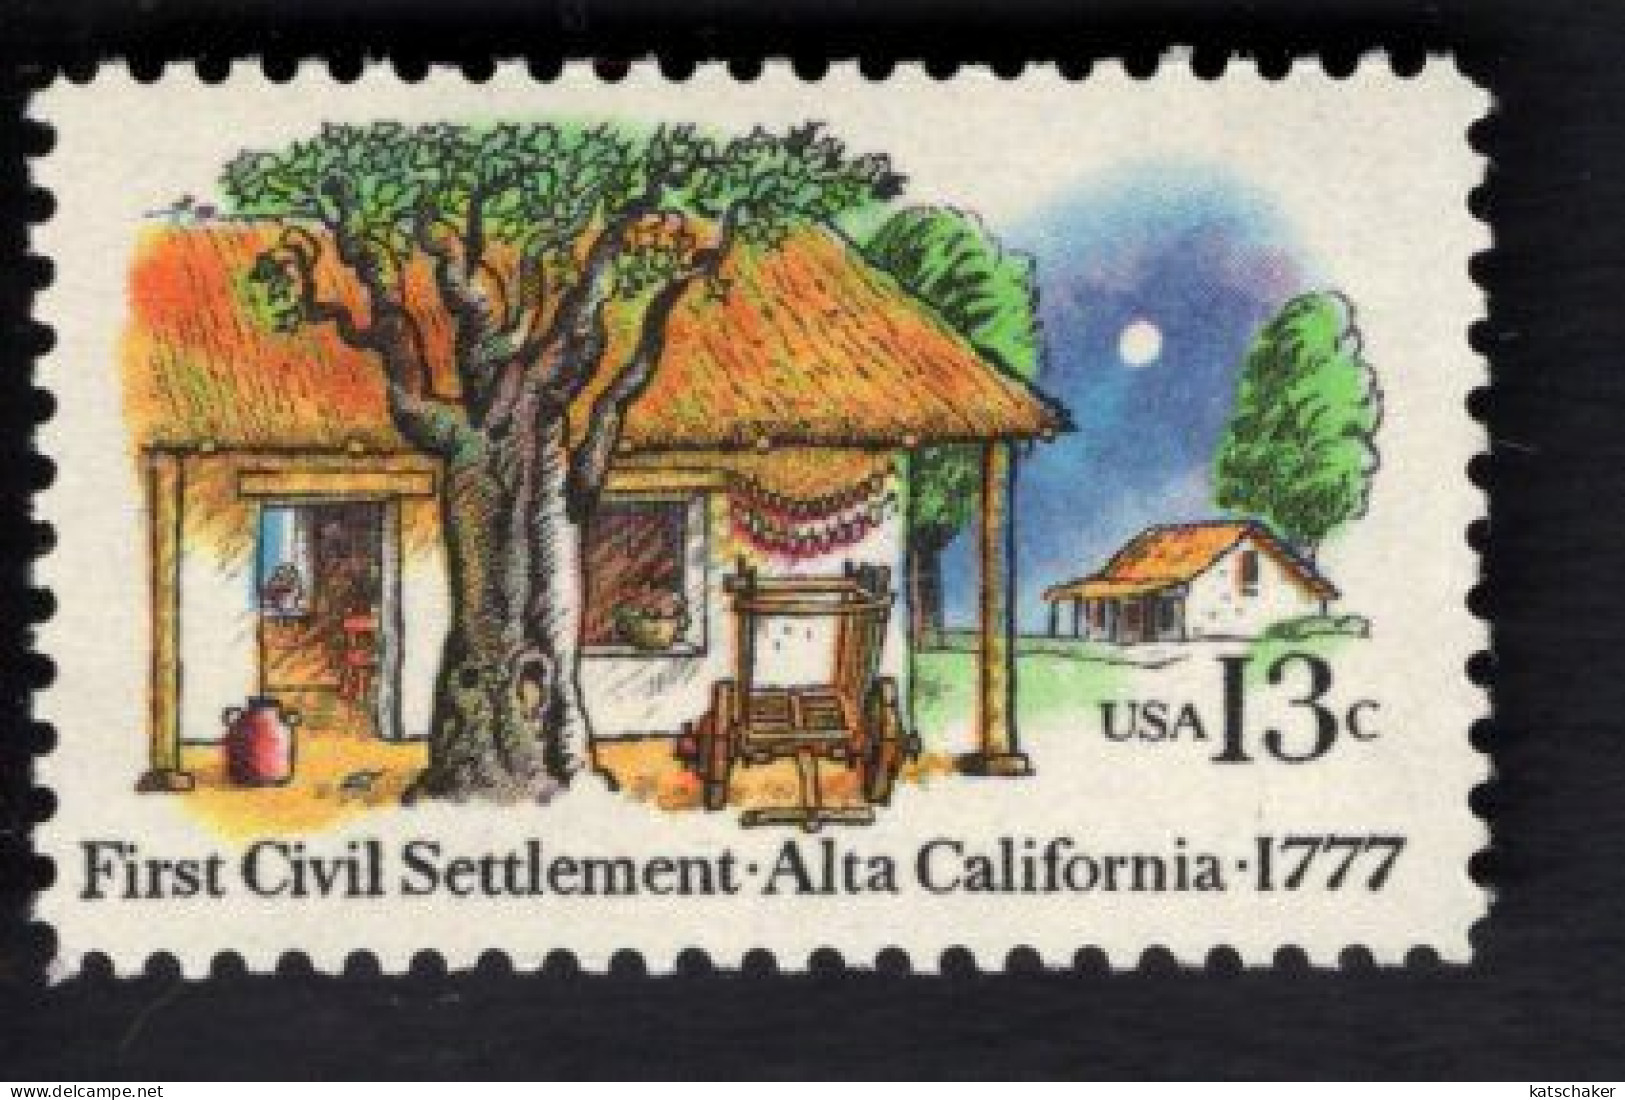 199965415 SCOTT 1725 (XX) POSTFRIS MINT NEVER HINGED - FARM HOUSES  - ALTA CALIFORNIA ISSUE - Unused Stamps